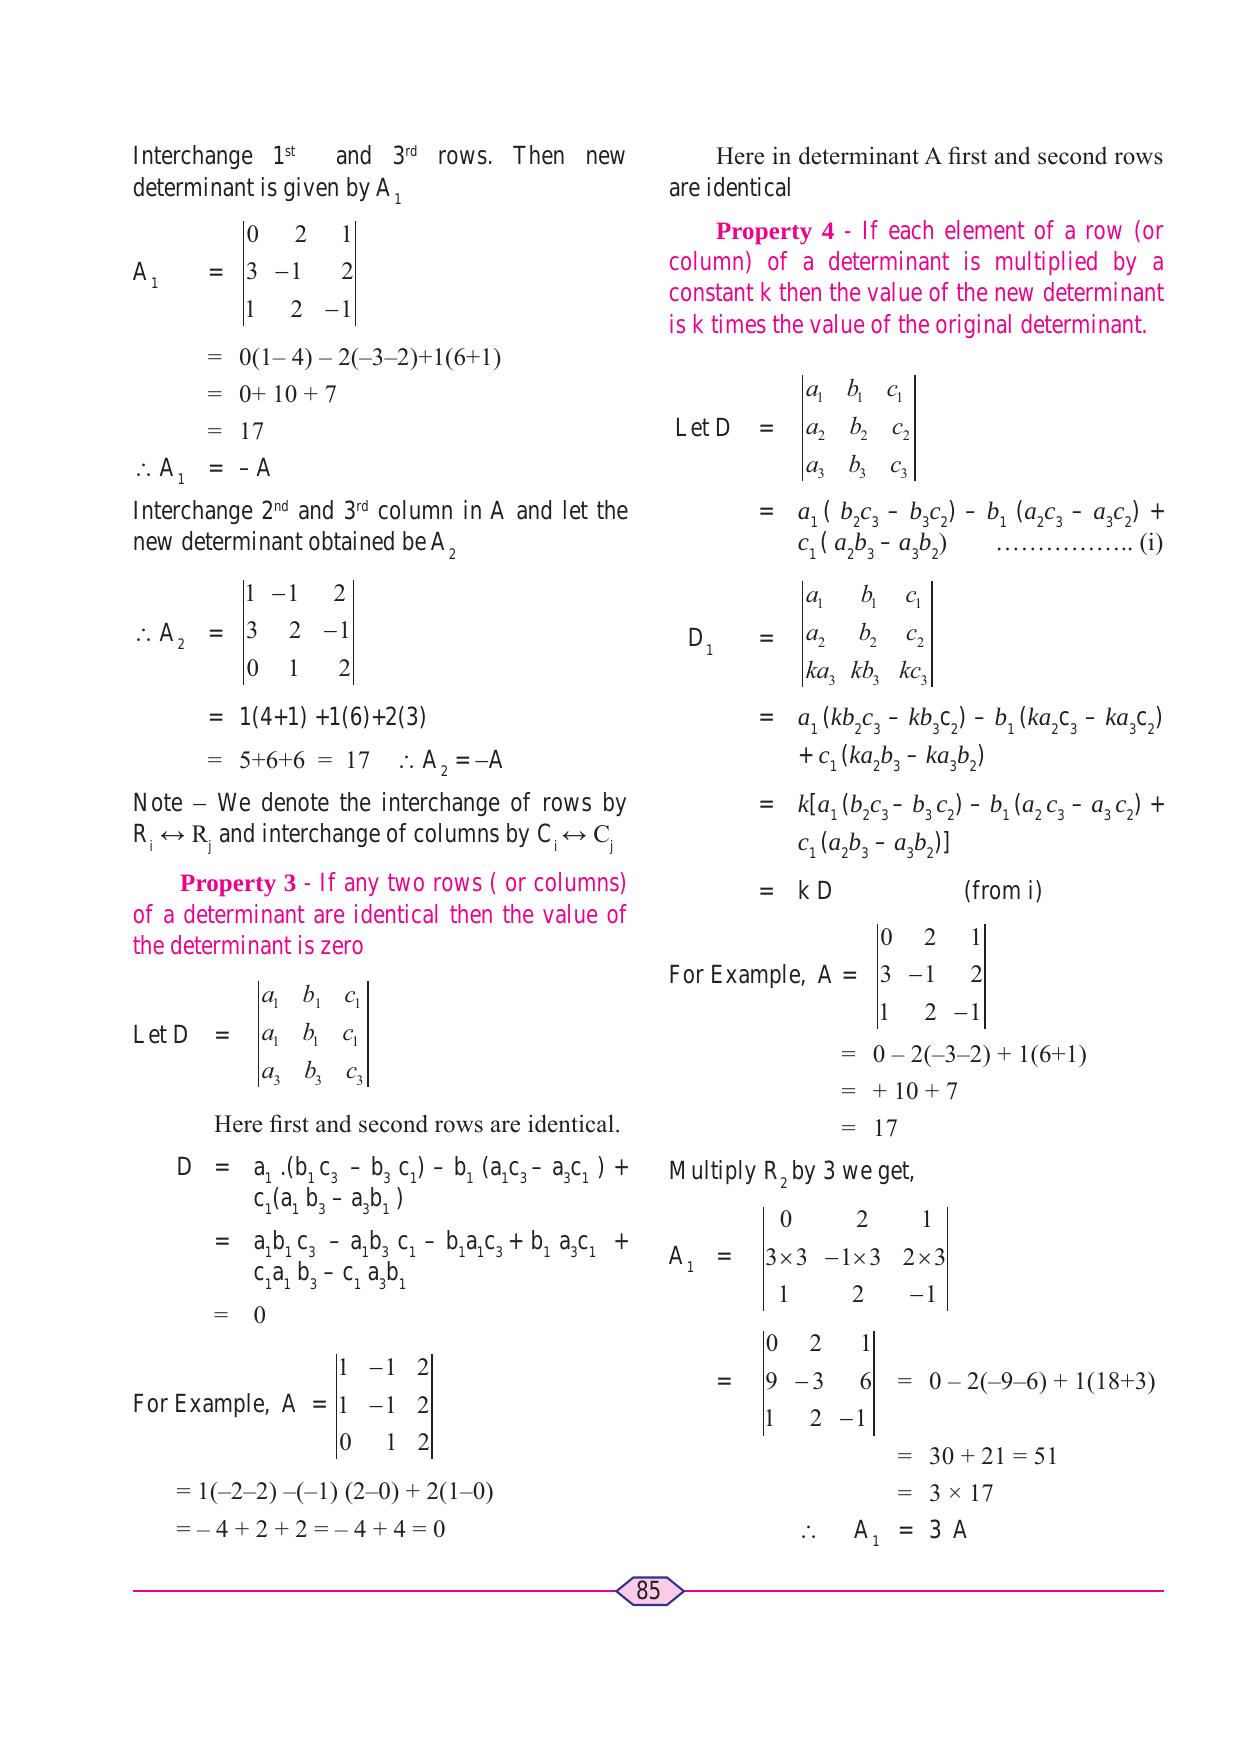 Maharashtra Board Class 11 Maths (Commerce) (Part 1) Textbook - Page 95